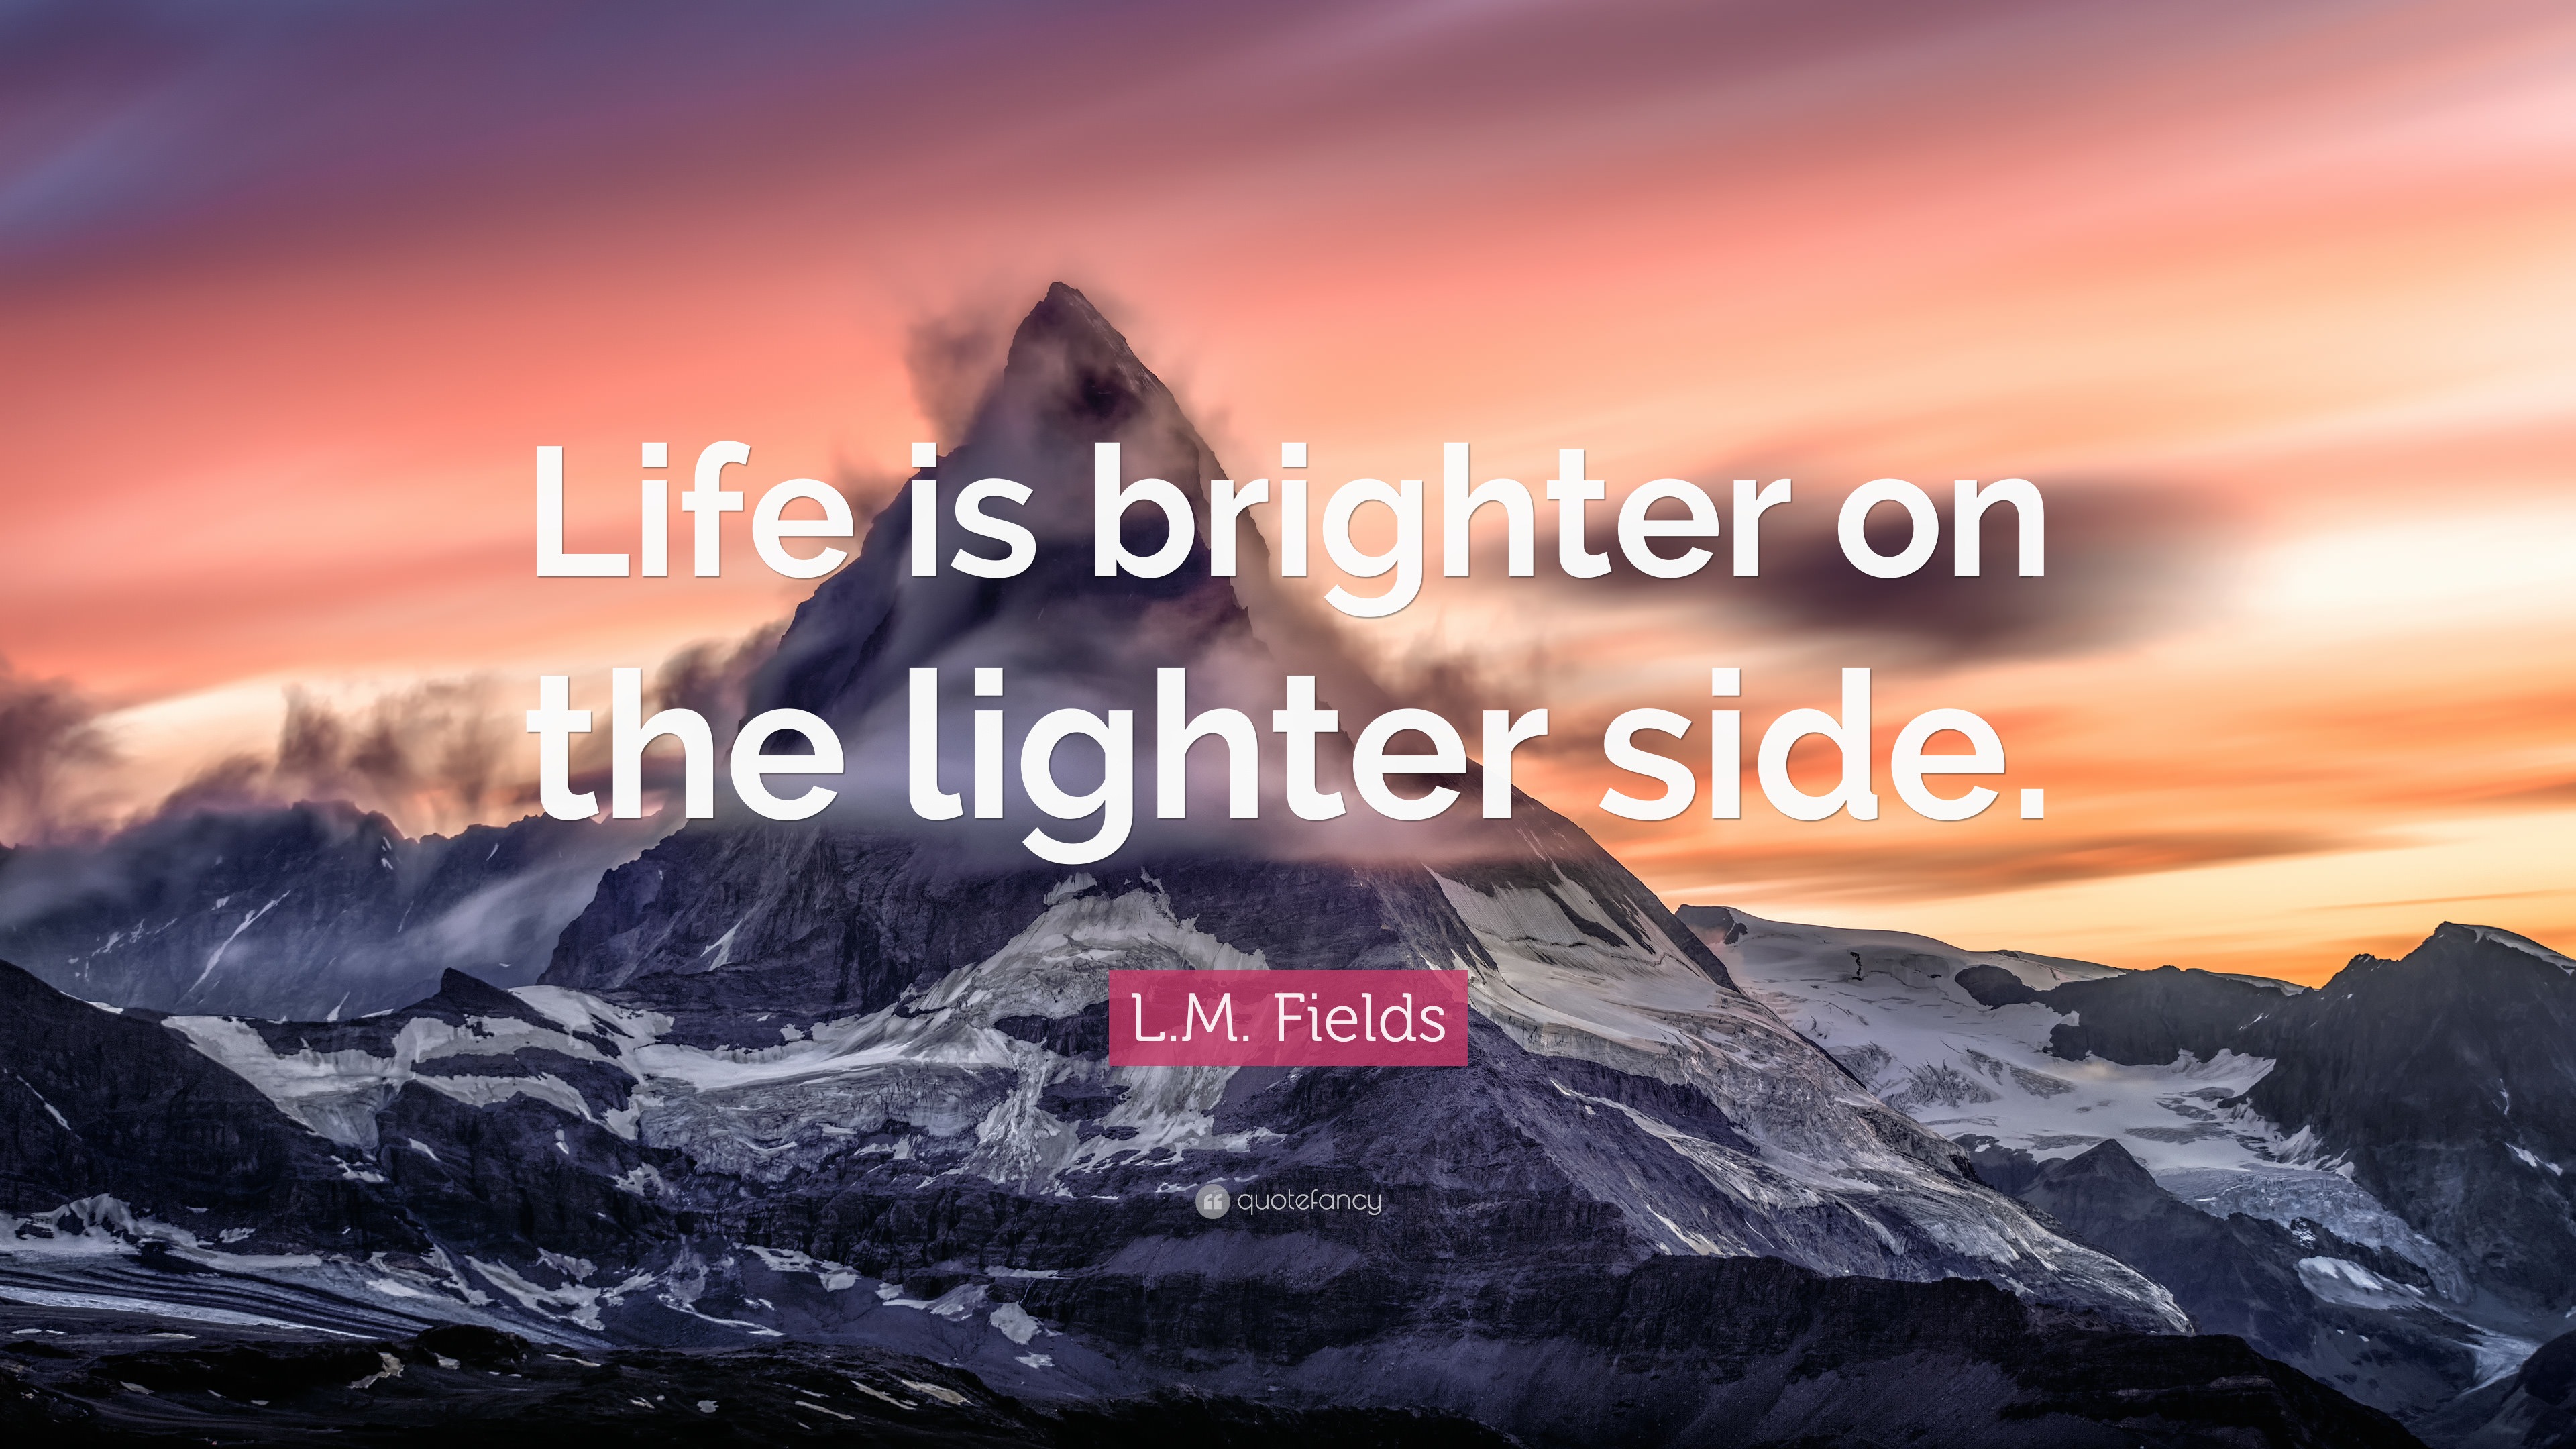 L.M. Quote: “Life is brighter on the lighter side.”